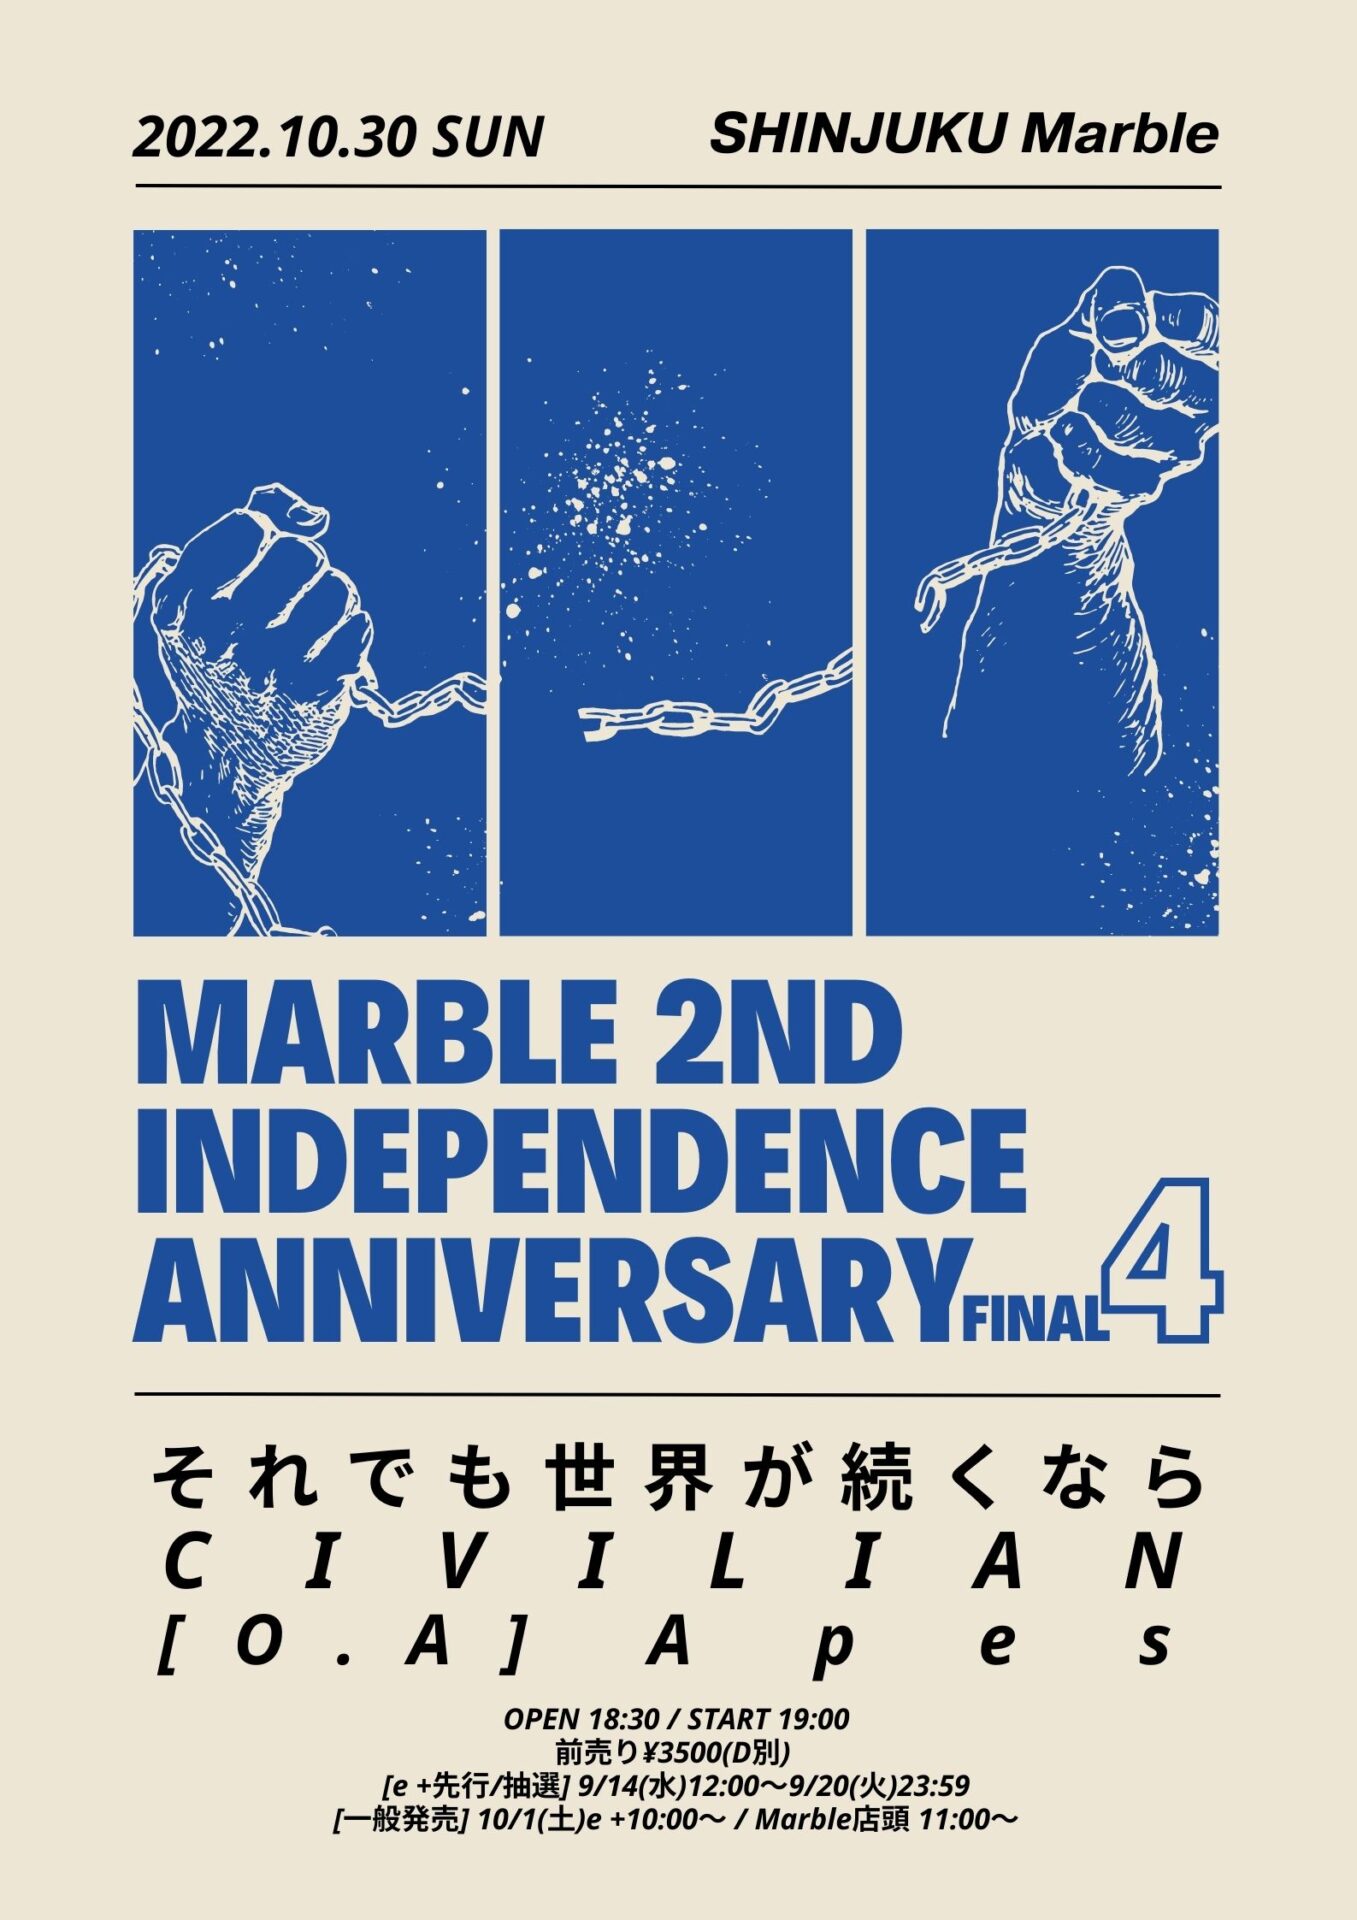 Marble 2nd INDEPENDENCE ANNIVERSARY 4(FINAL)